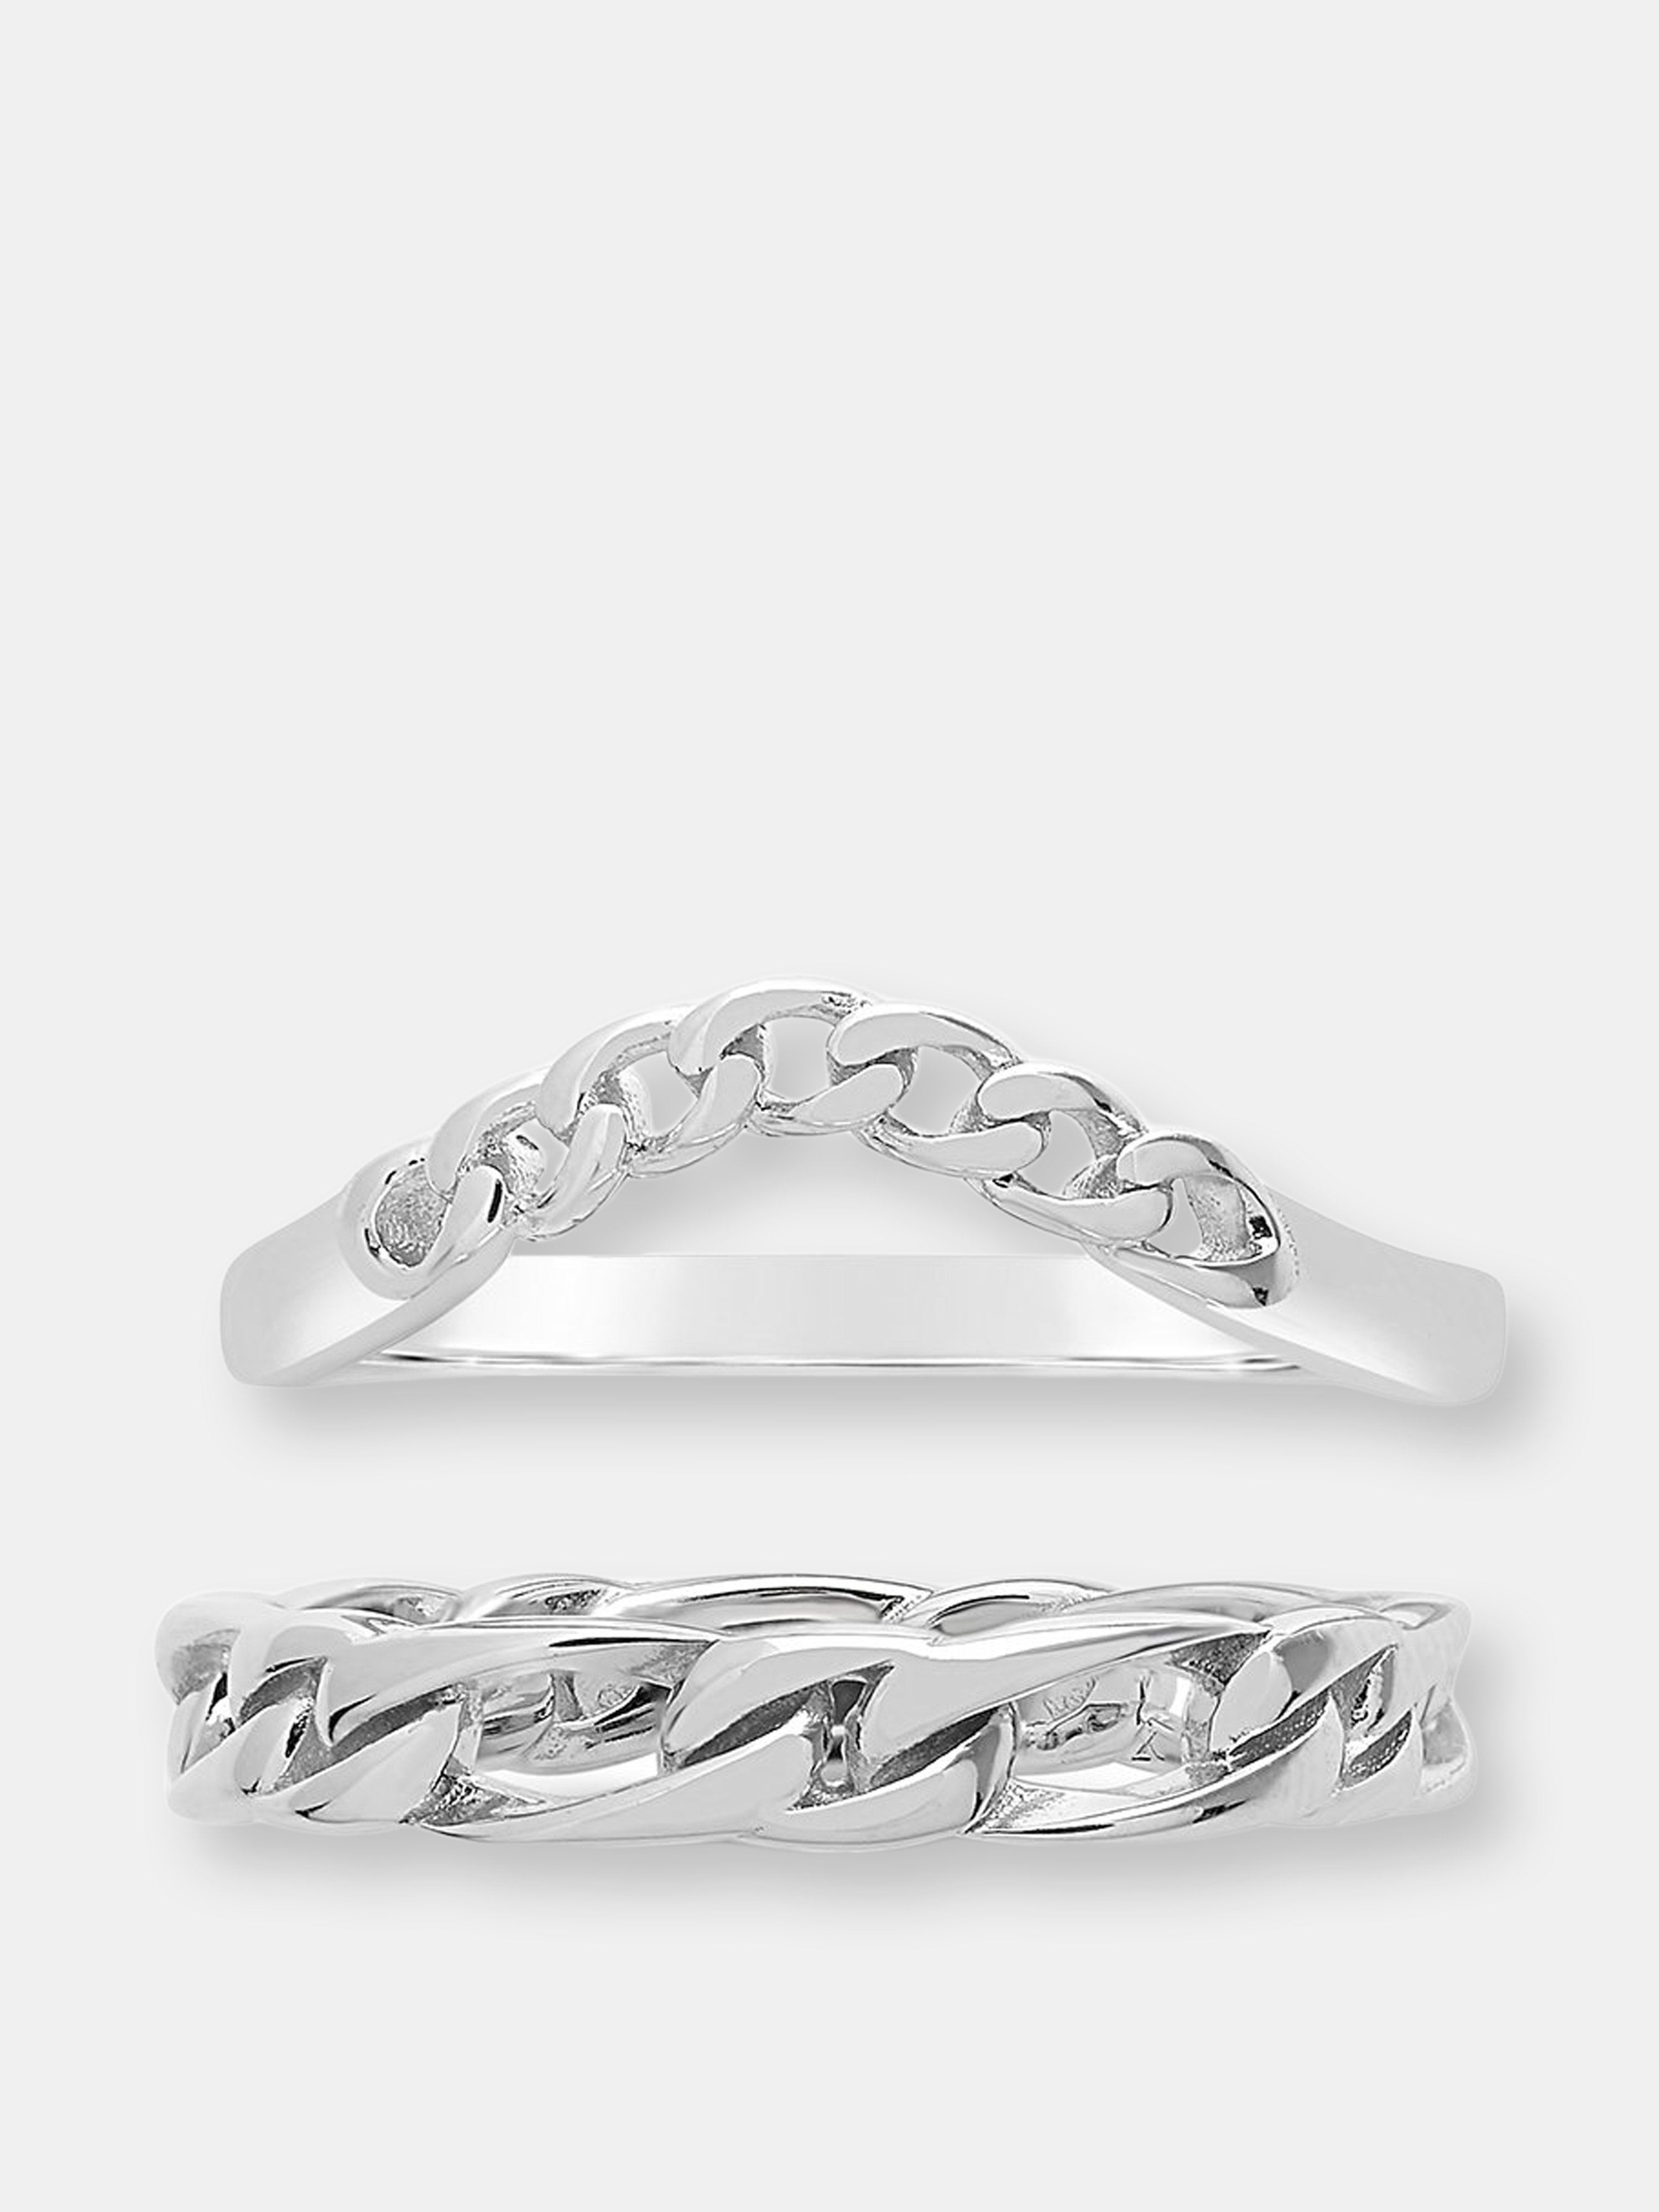 STERLING FOREVER STERLING FOREVER STERLING SILVER FIGARO & CURB CHAIN LINK RING SET